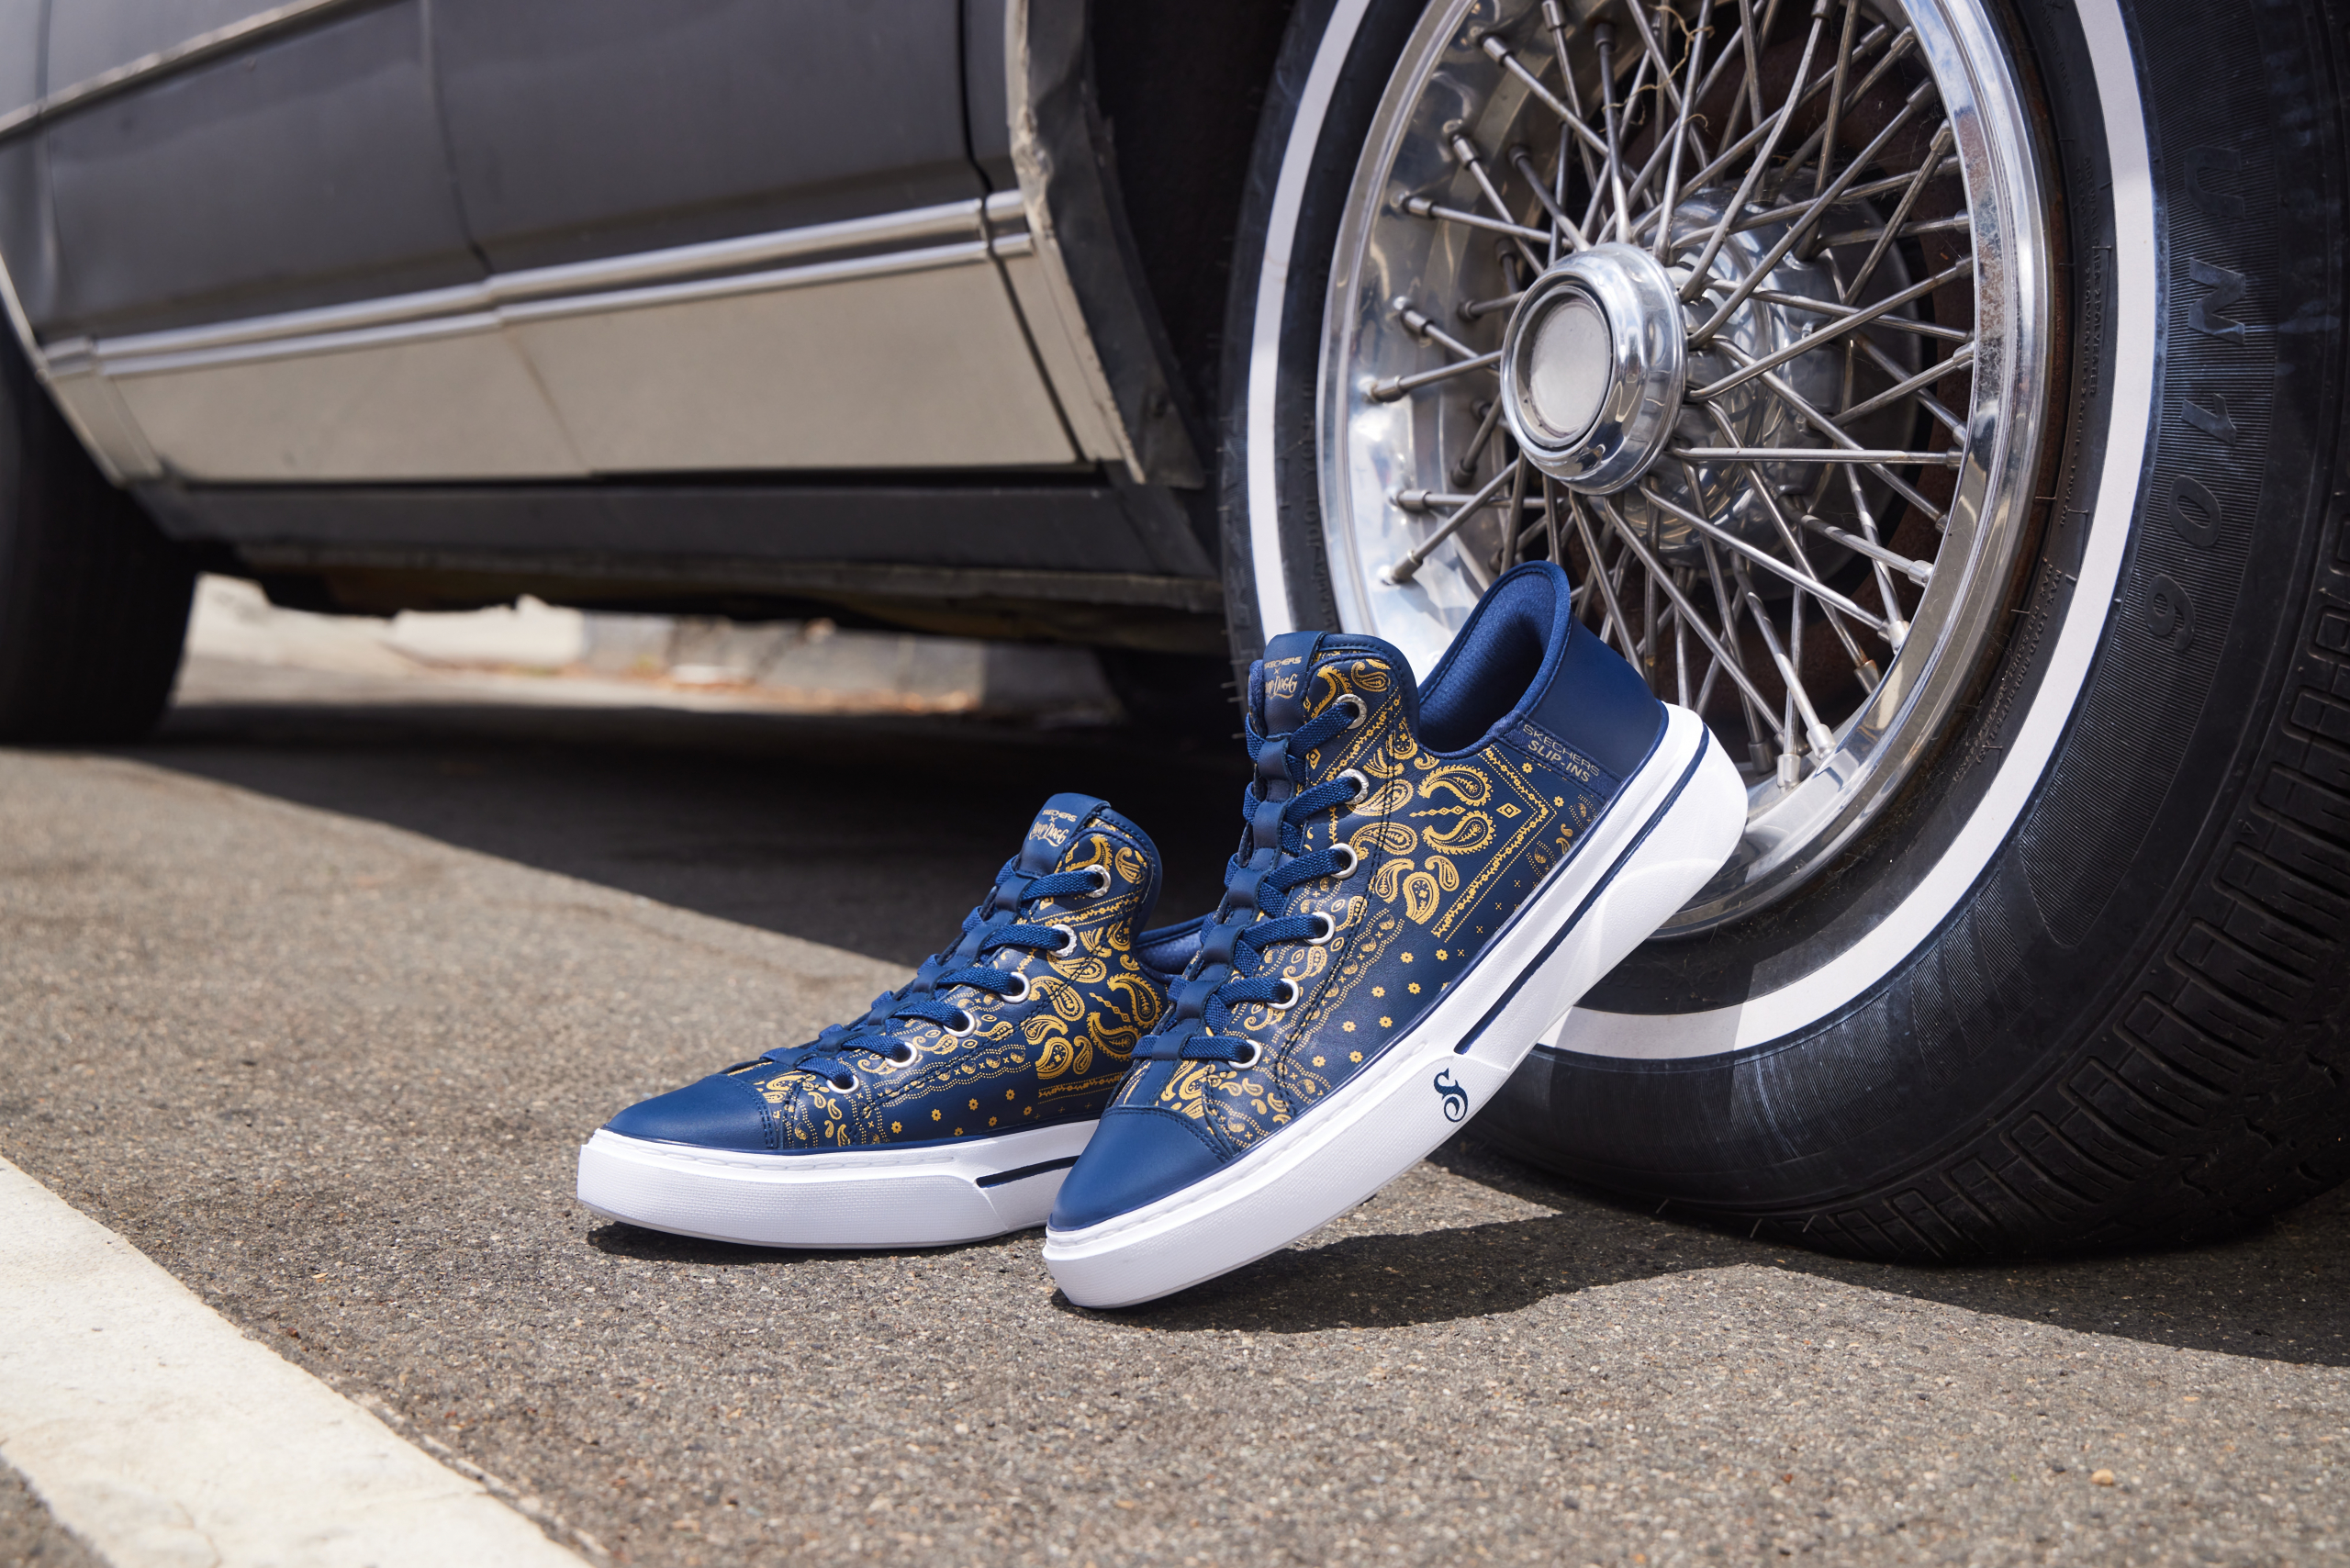 Snoop Dogg x Skechers Sneaker Collaboration, Capsule Collections